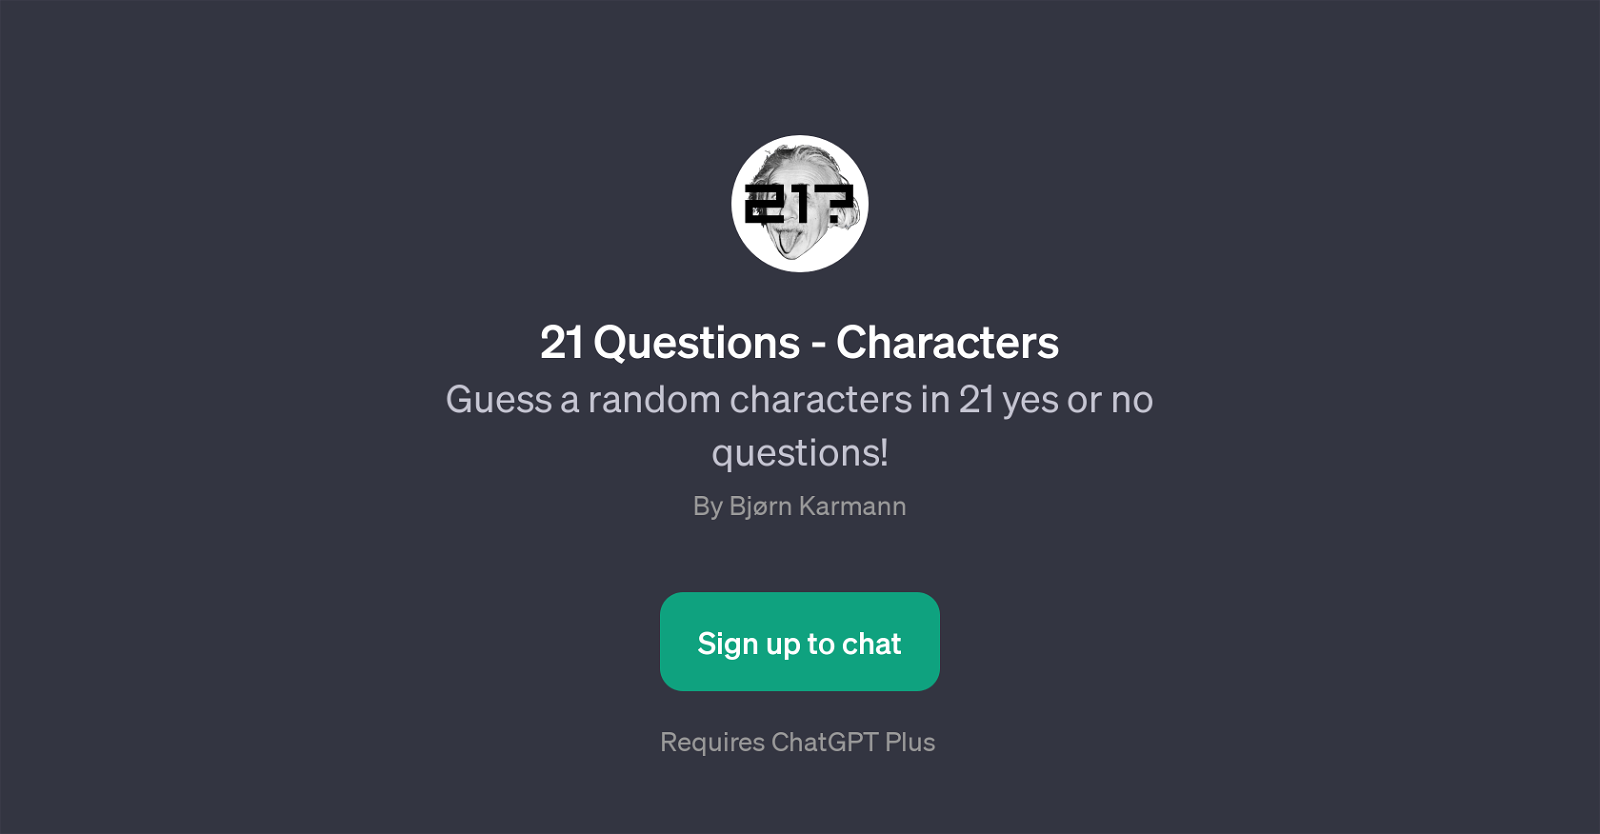 21 Questions - Characters website